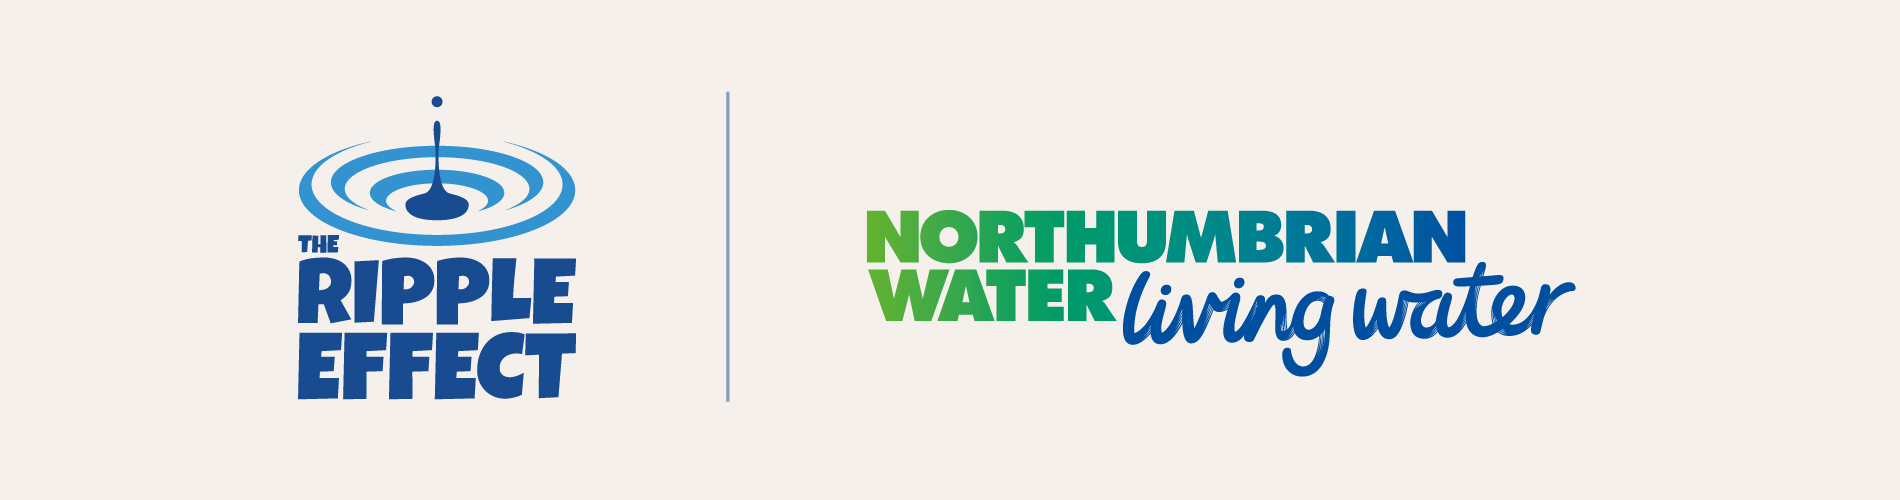 Northumbrian Water: The Ripple Effect